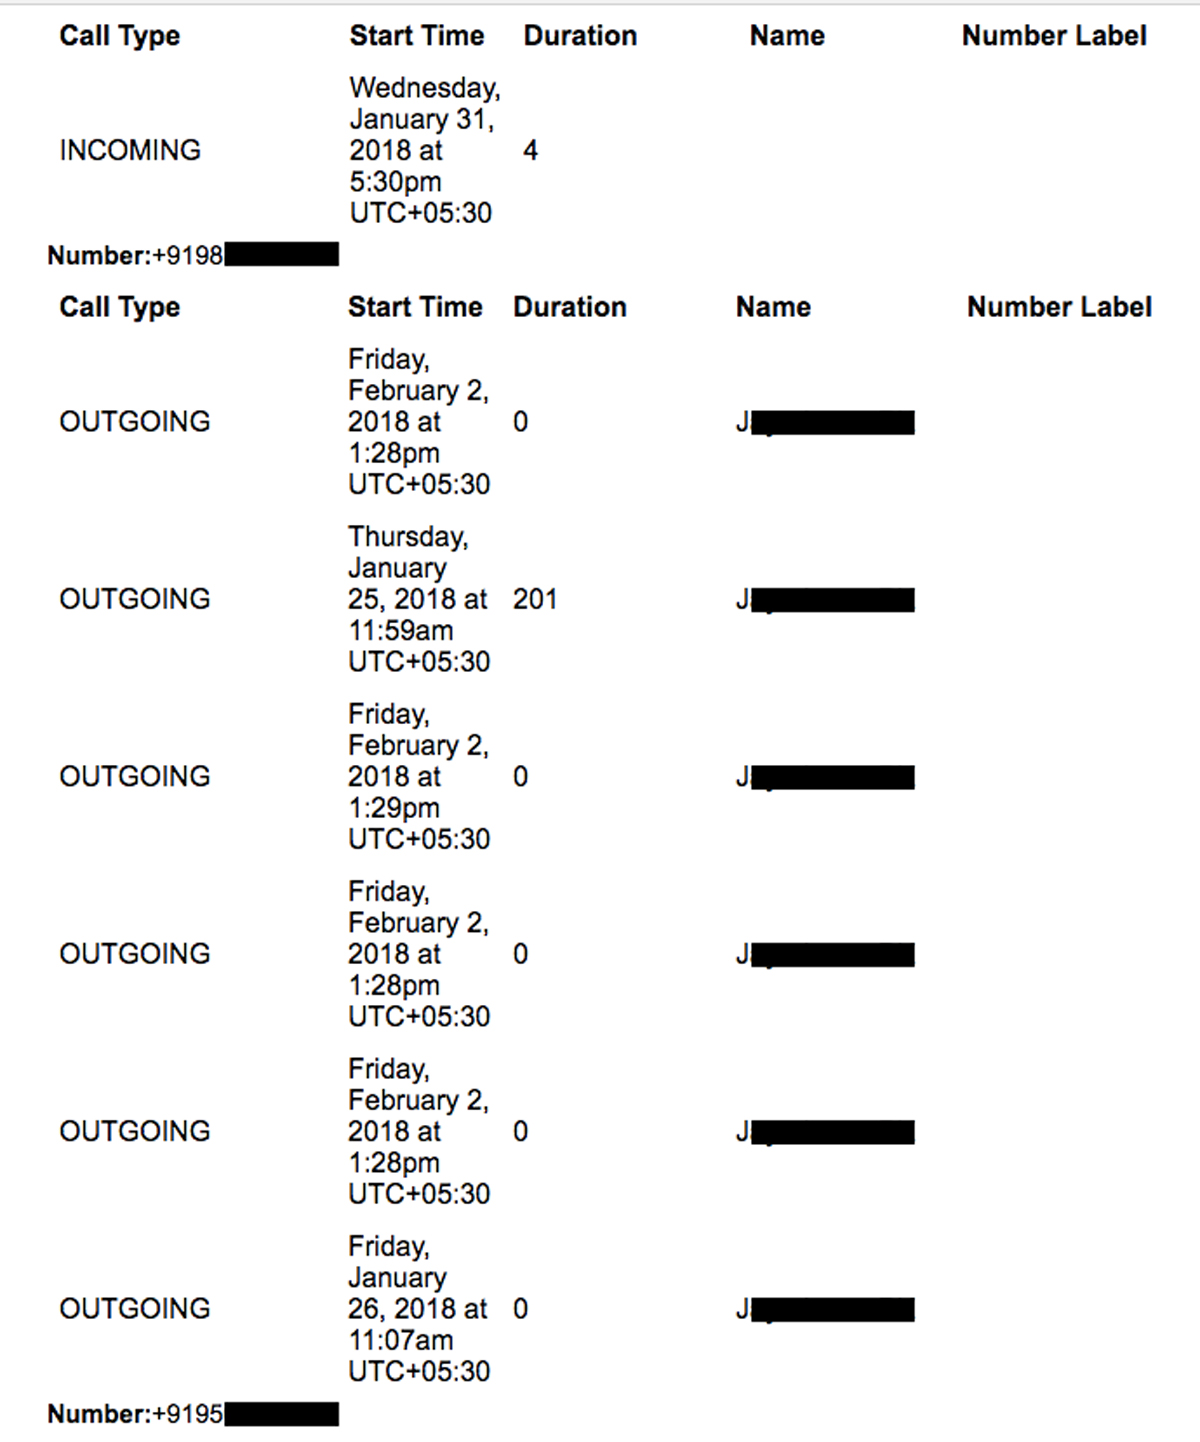 A snapshot of phone call records from the author's Facebook data (details redacted)